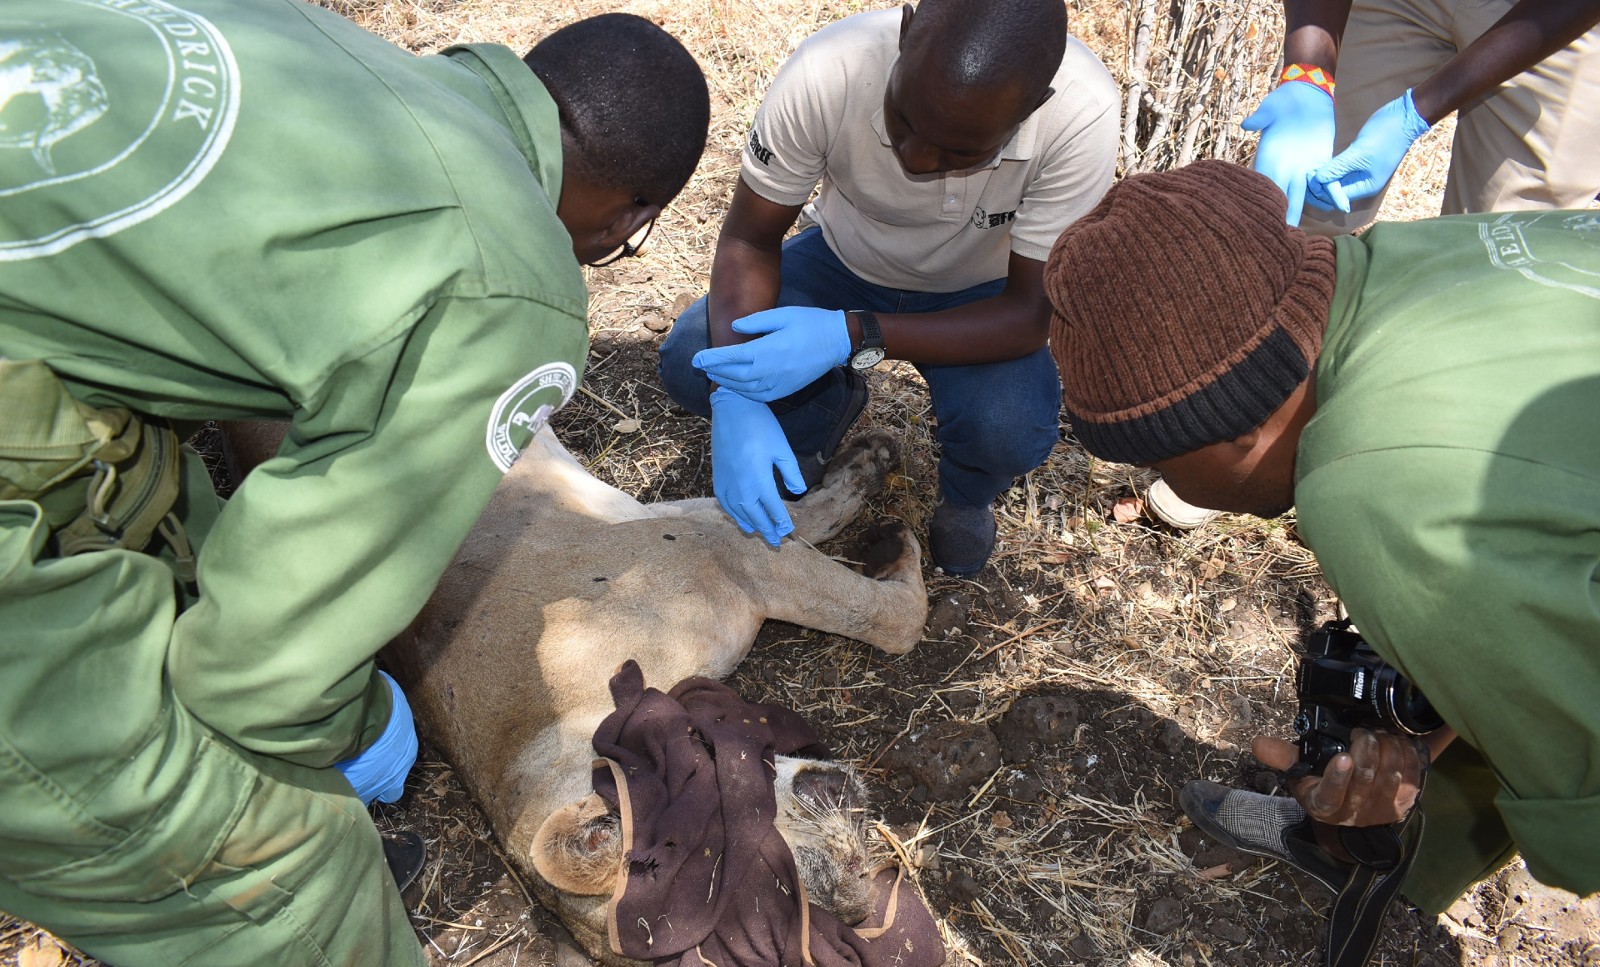 A team of people treat an injured lioness who is lying on the ground